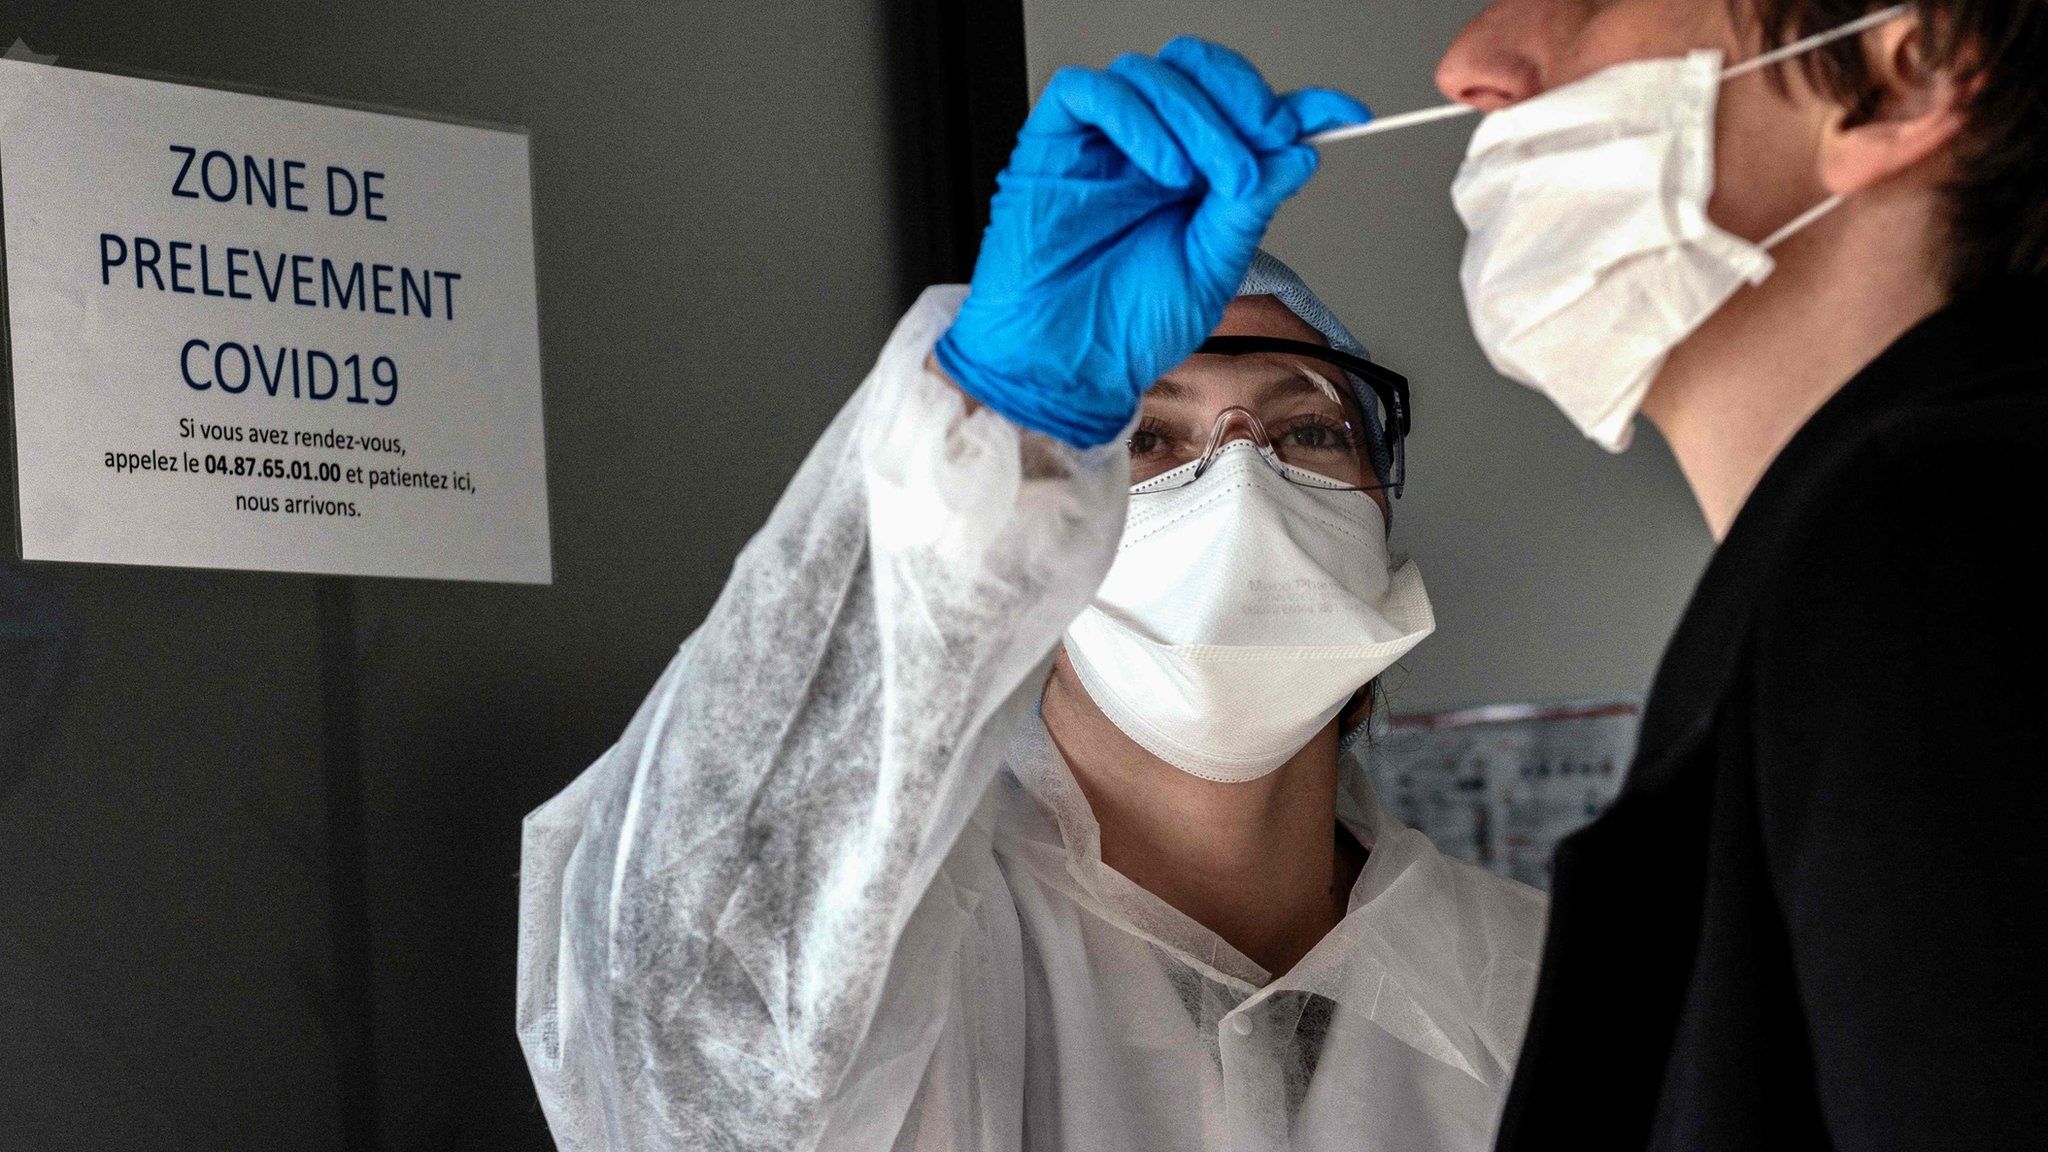 A person is tested for the Covid-19 virus in Villeurbanne, France (23 March 2020)